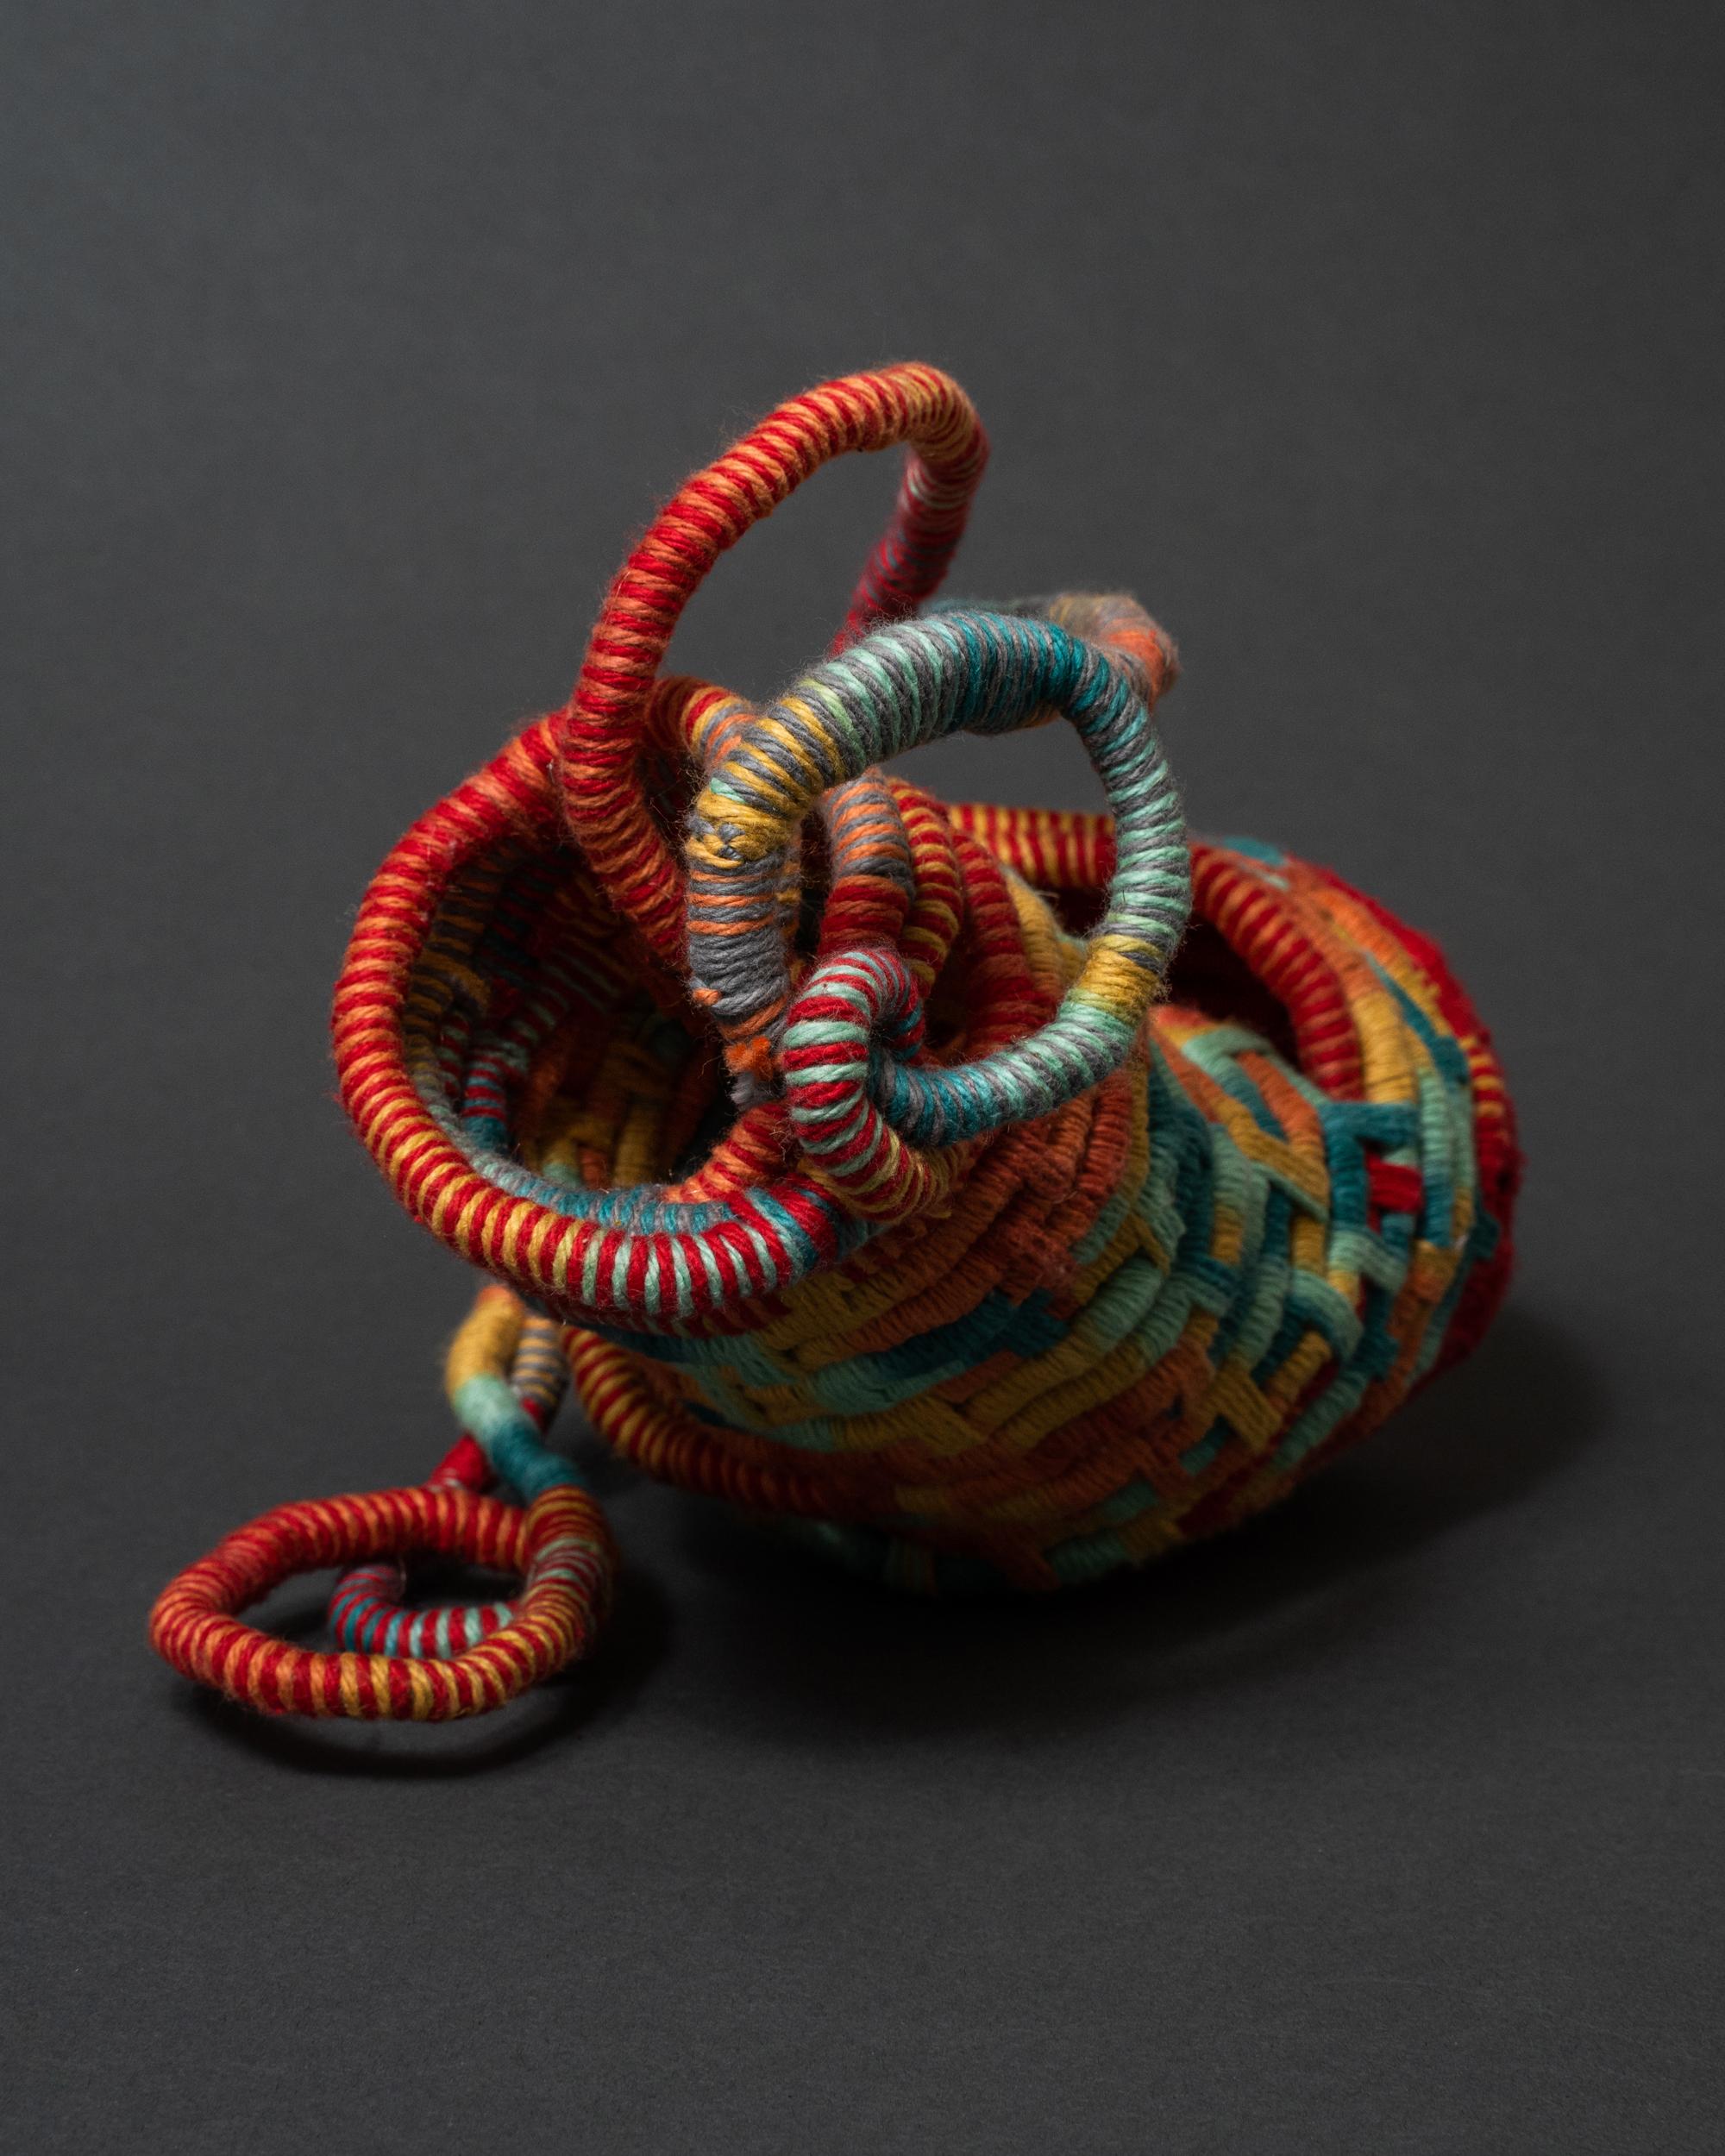 Coiling cord and cotton yarn textile sculpture.  Pink, yellow, blue, green, fuchsia, yellow, red. Fiber art, fine art basketry. 

This 